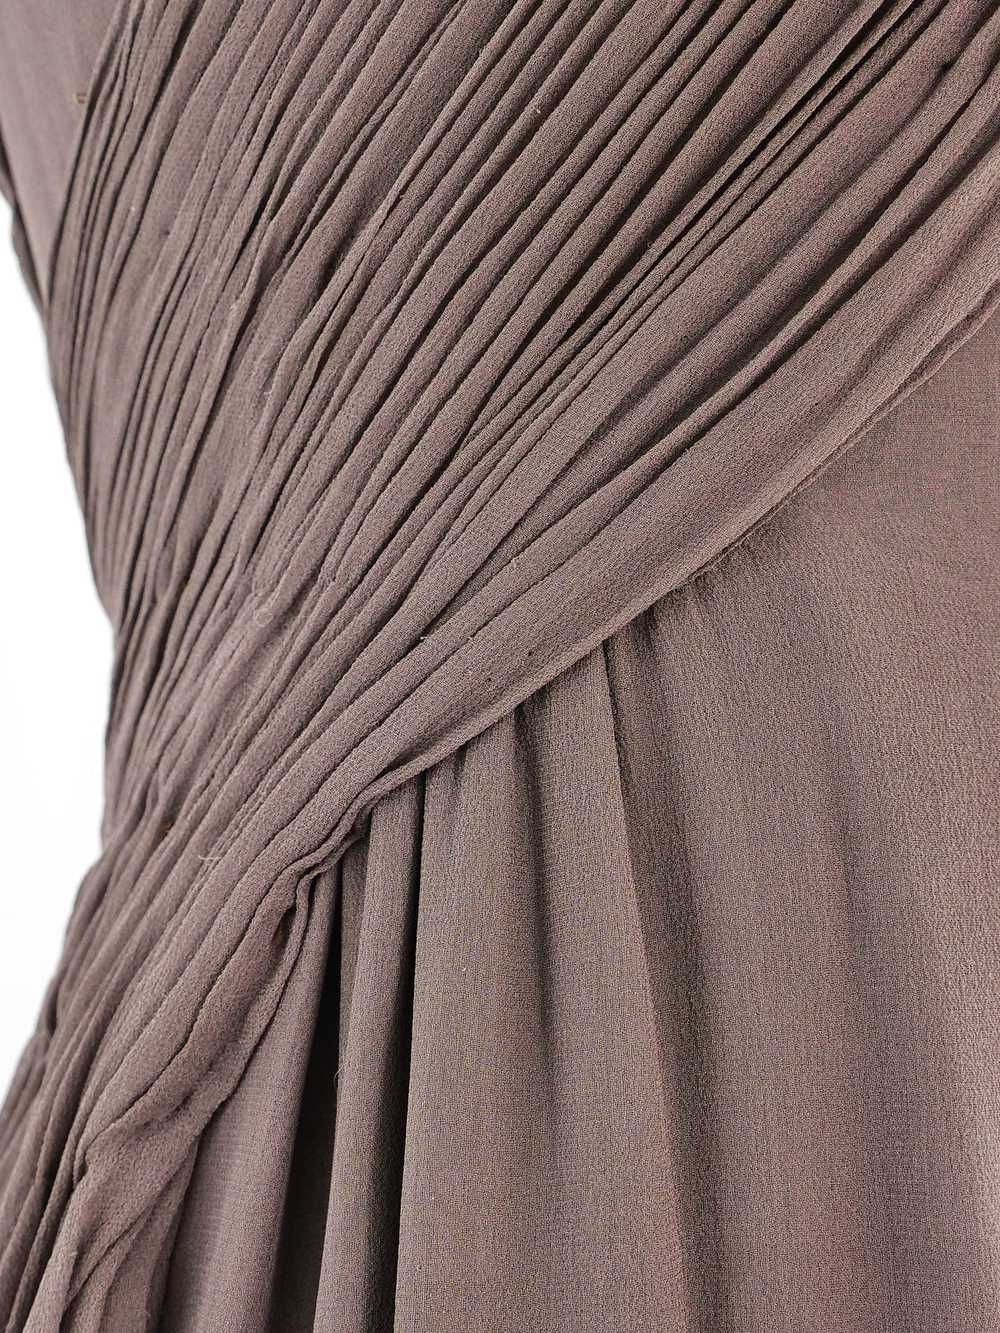 Ruched Silk Chiffon Gown - image 5